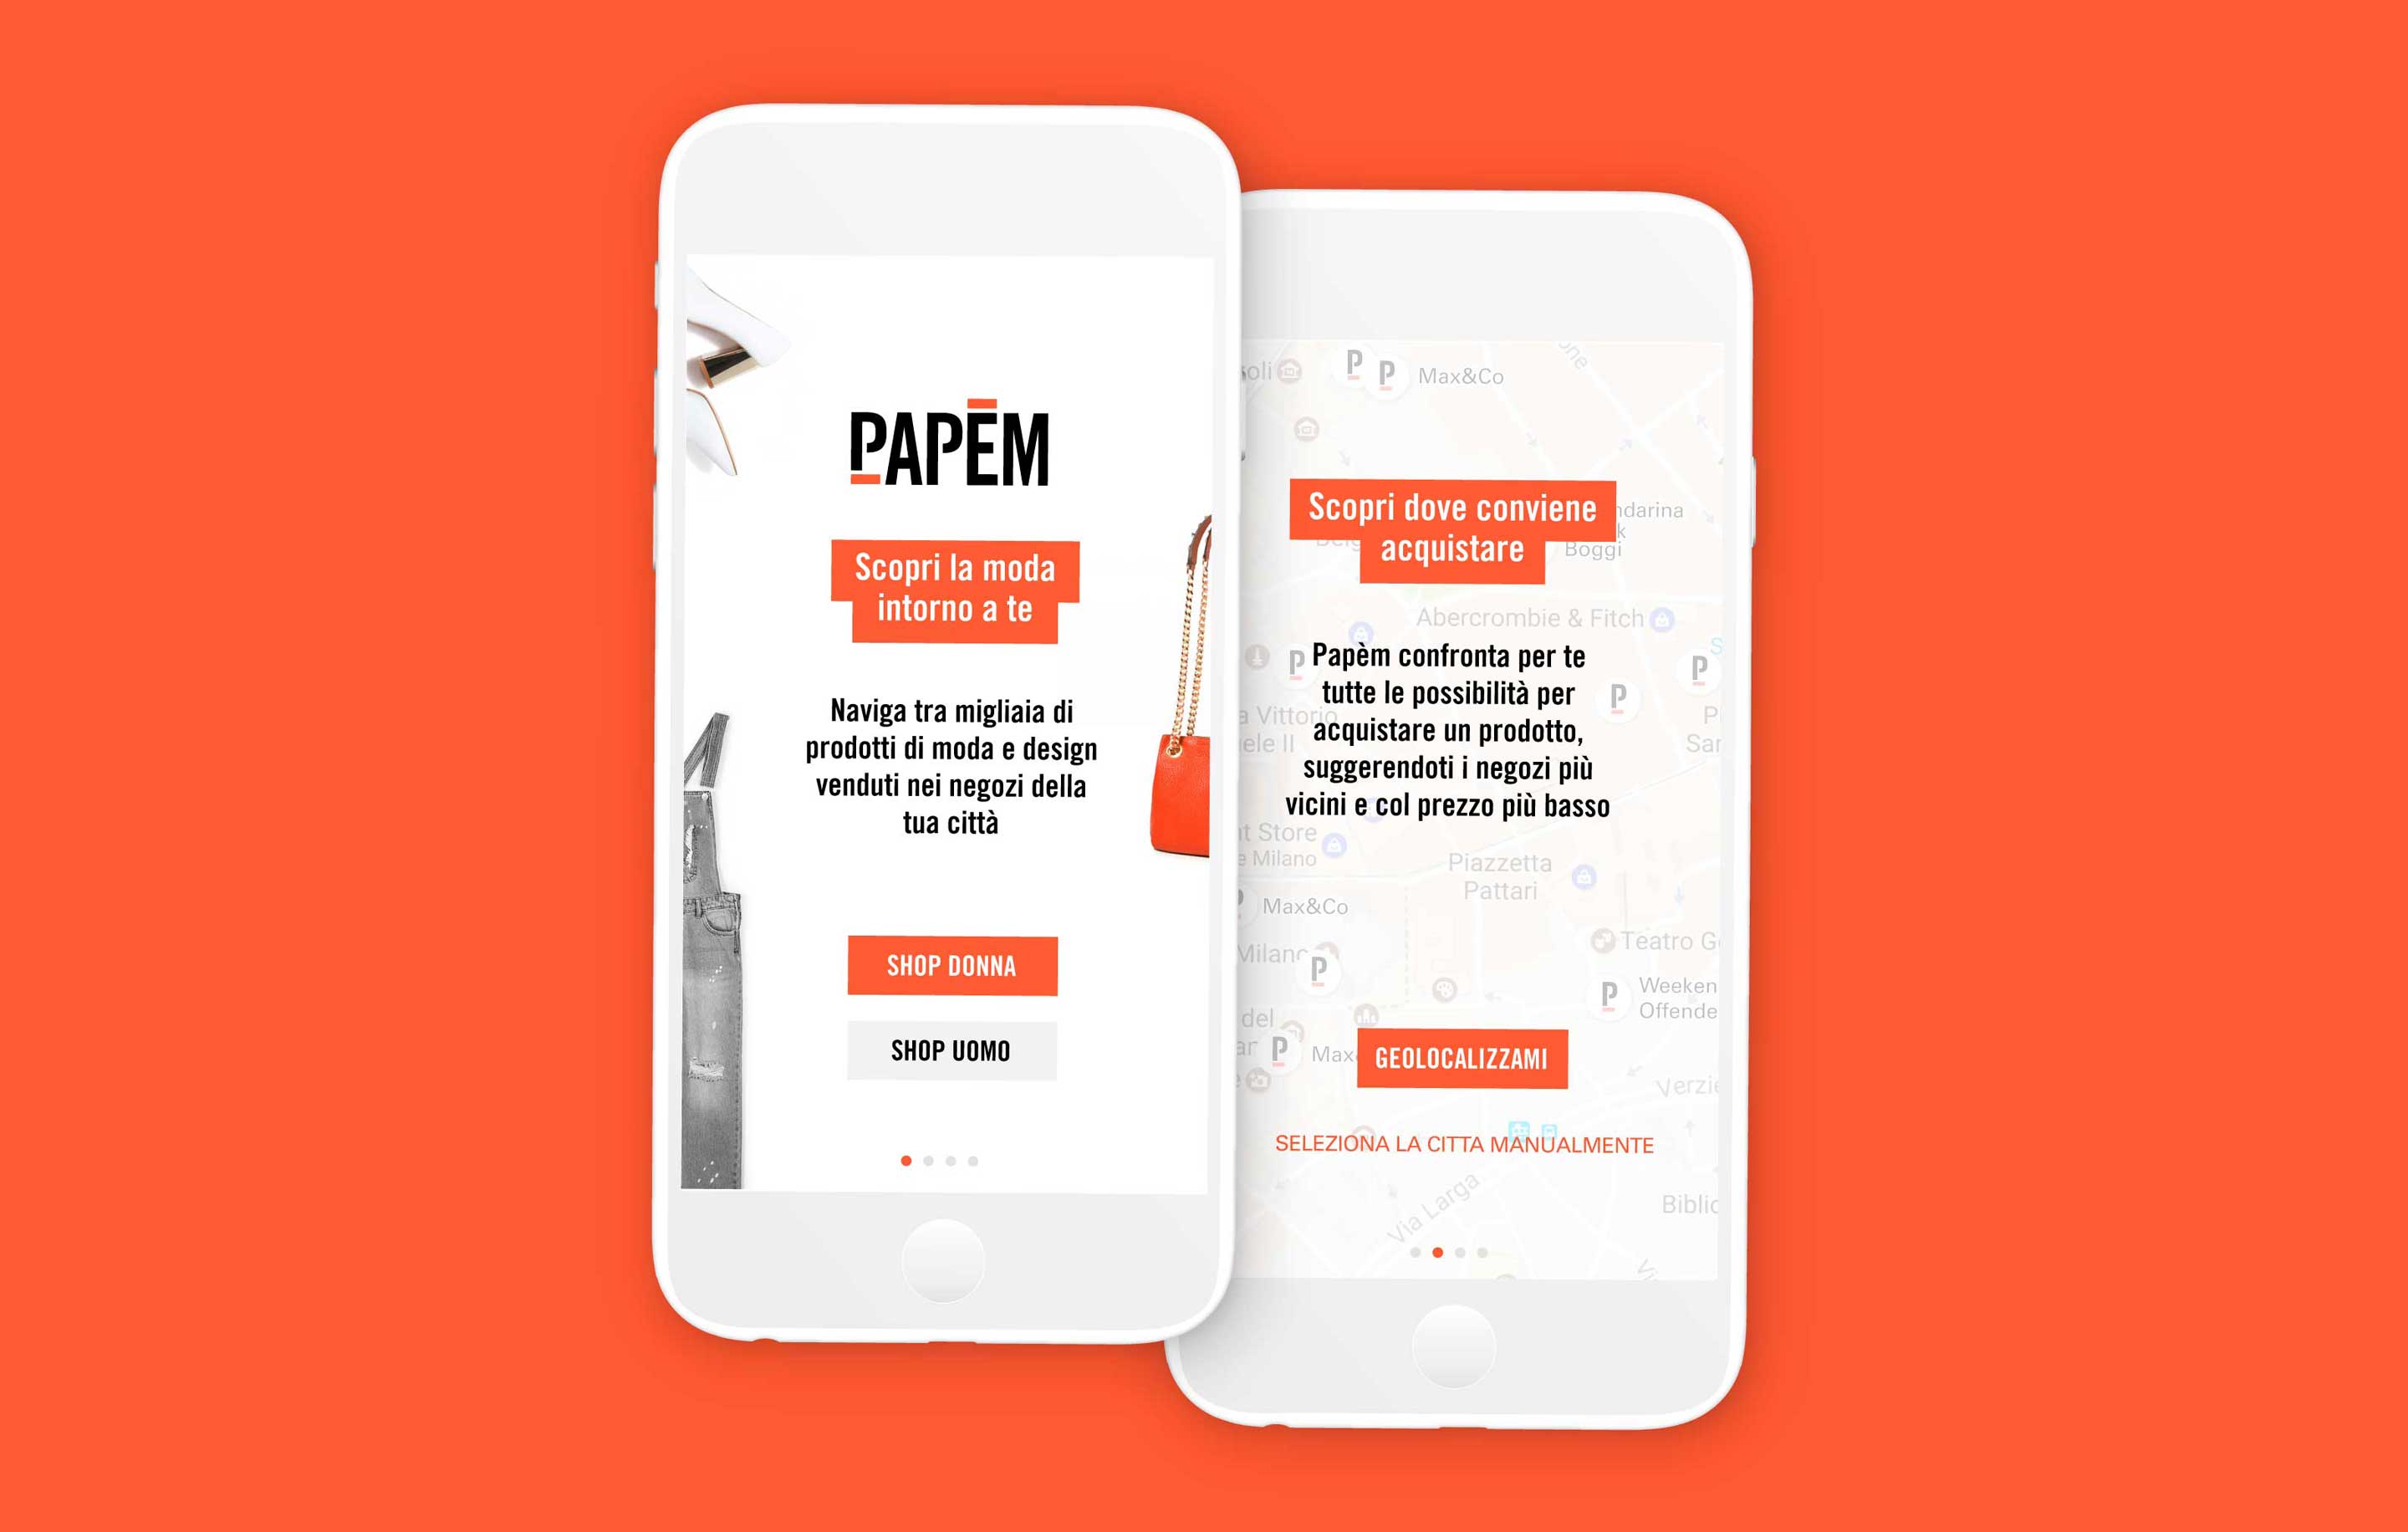 Branding and corporate identity for Papem, a fashion app in Italy by Ksenia Smirnova, 1503 Design